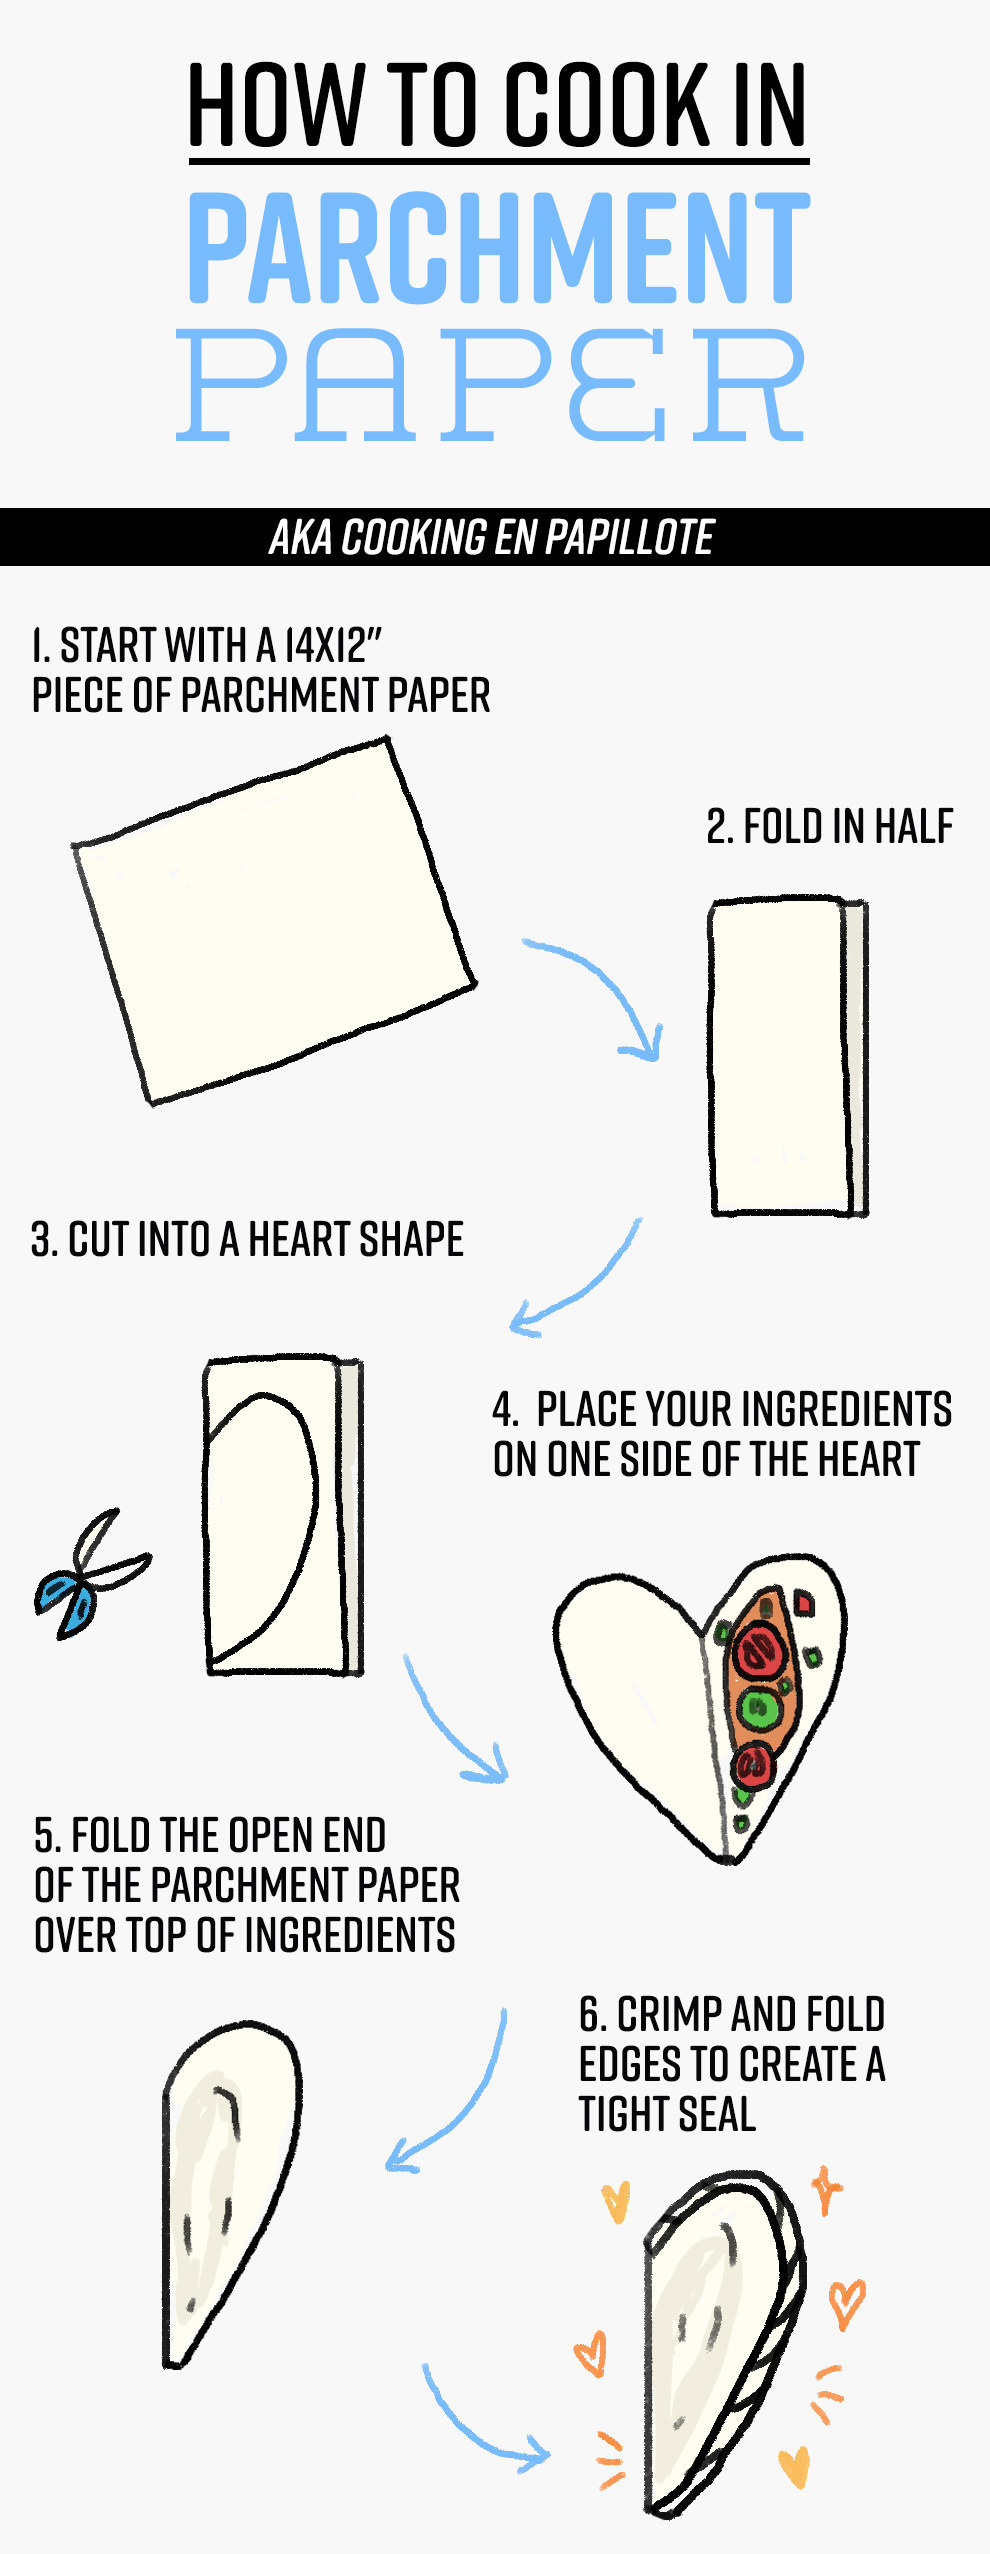 The instructions for cooking en papillote